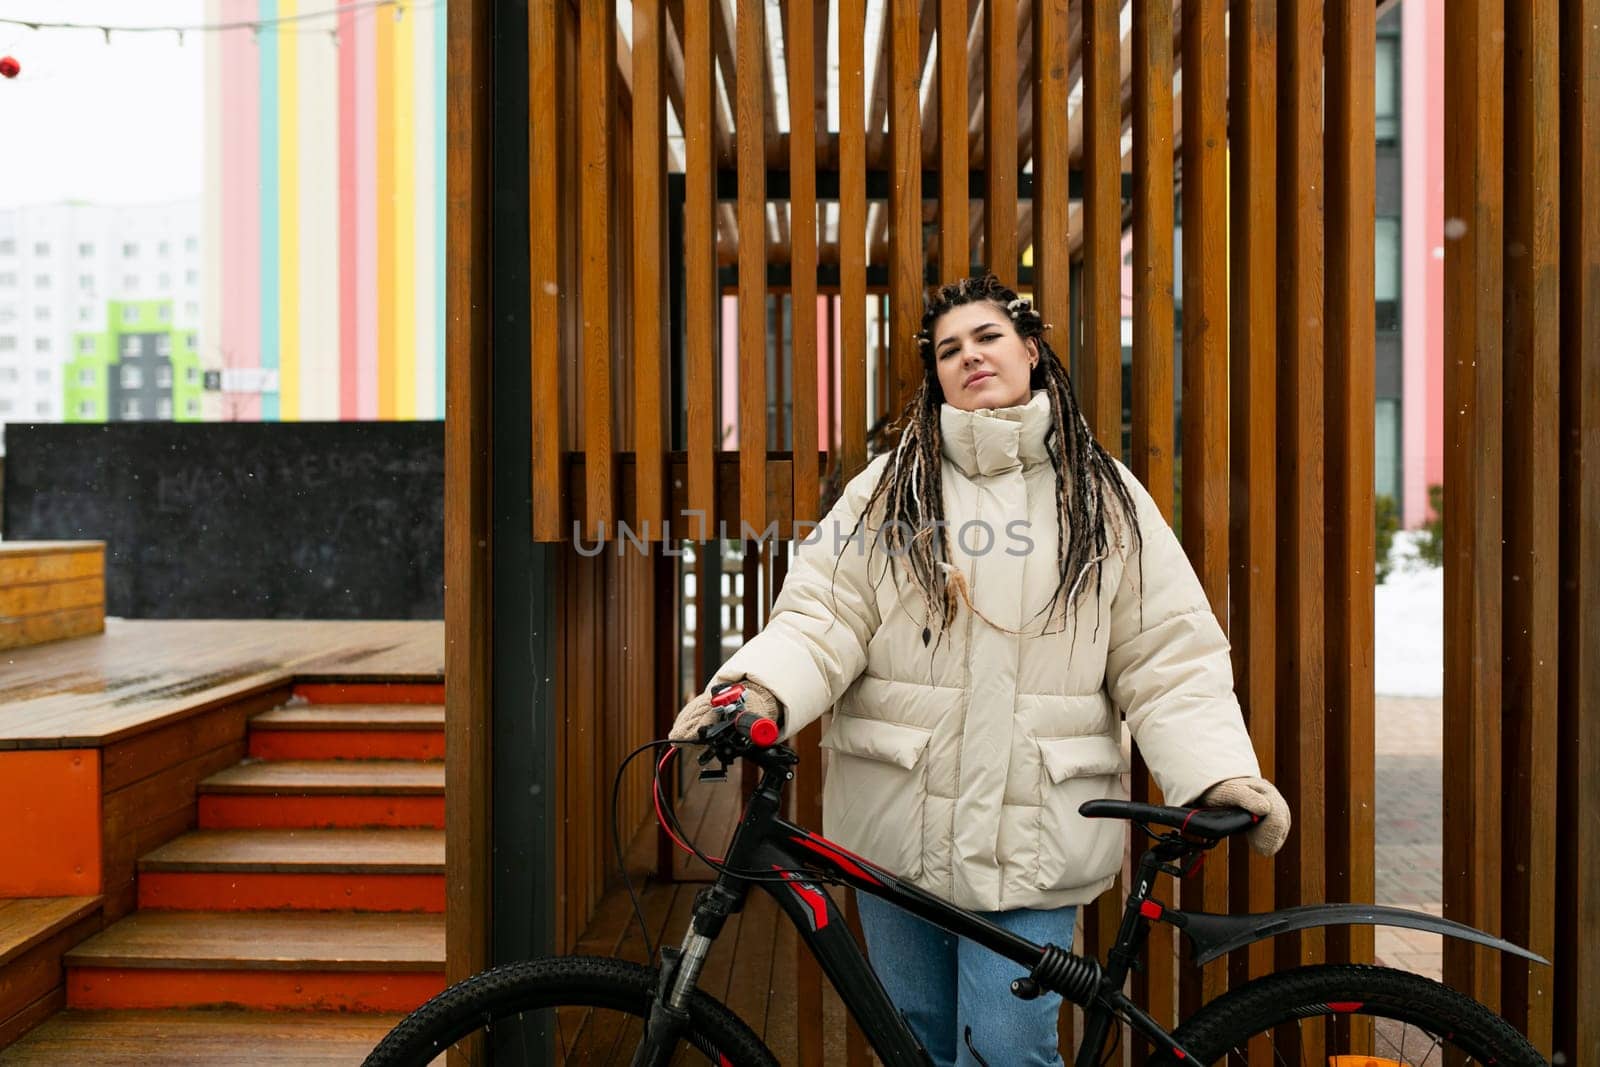 A woman with dreadlocks stands confidently next to her bicycle. She is wearing casual clothes and appears to be taking a break from cycling. The background shows an urban environment.